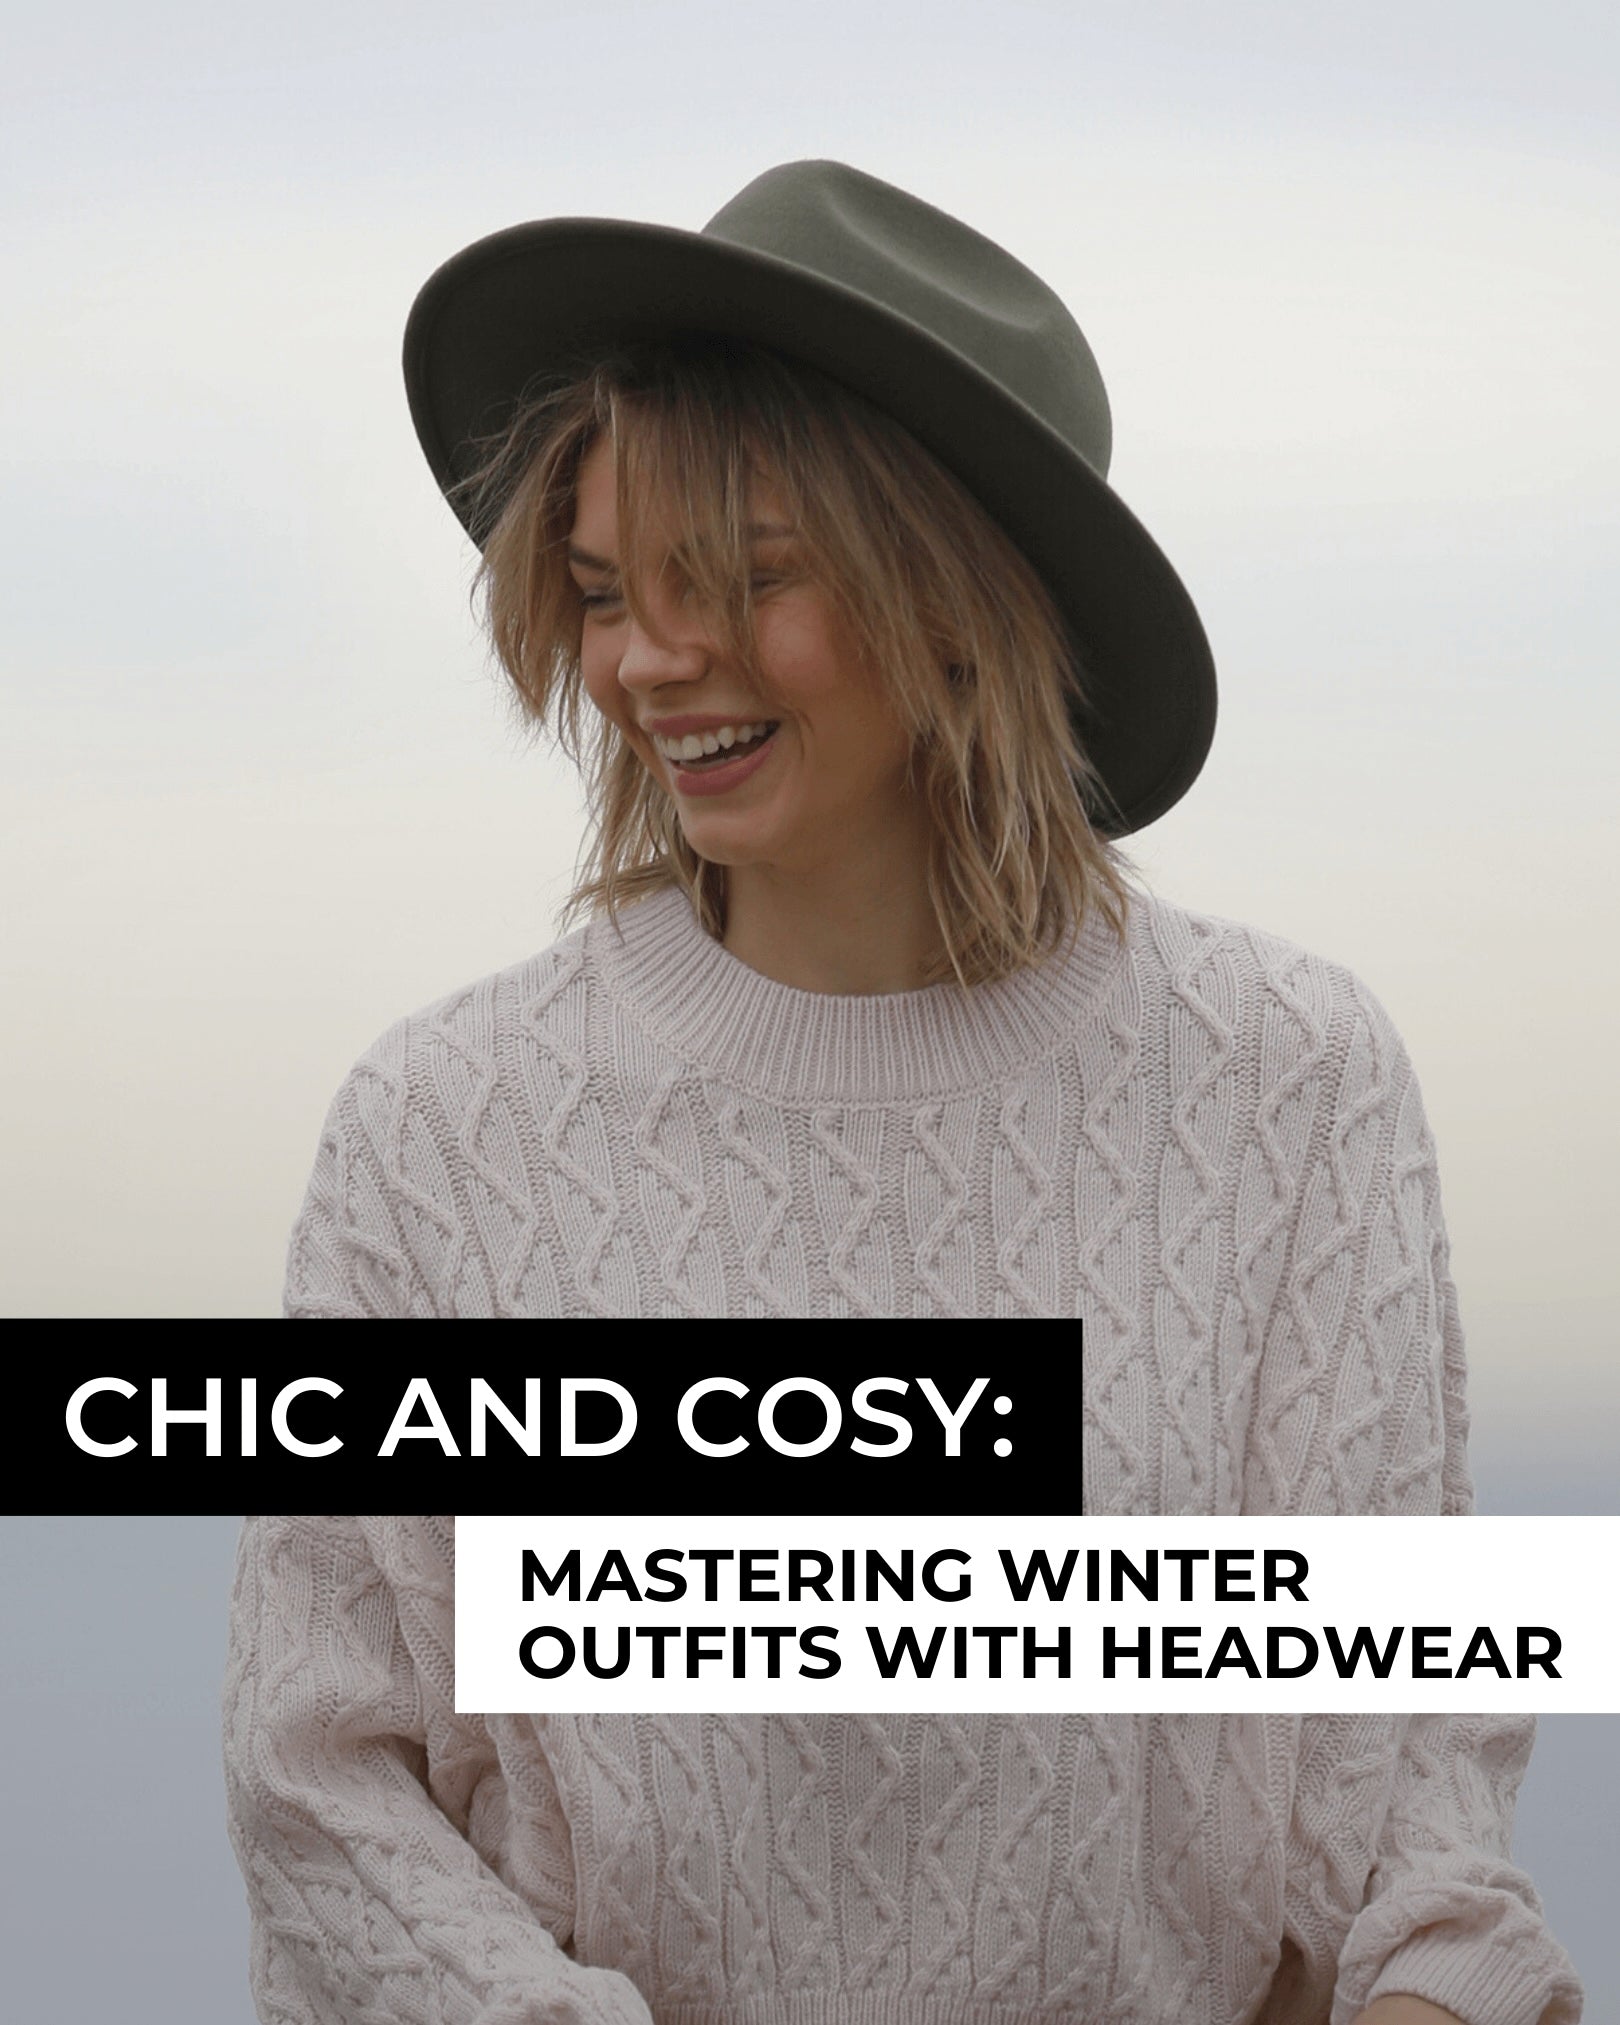 Chic and Cosy: Mastering Winter Outfits with Headwear